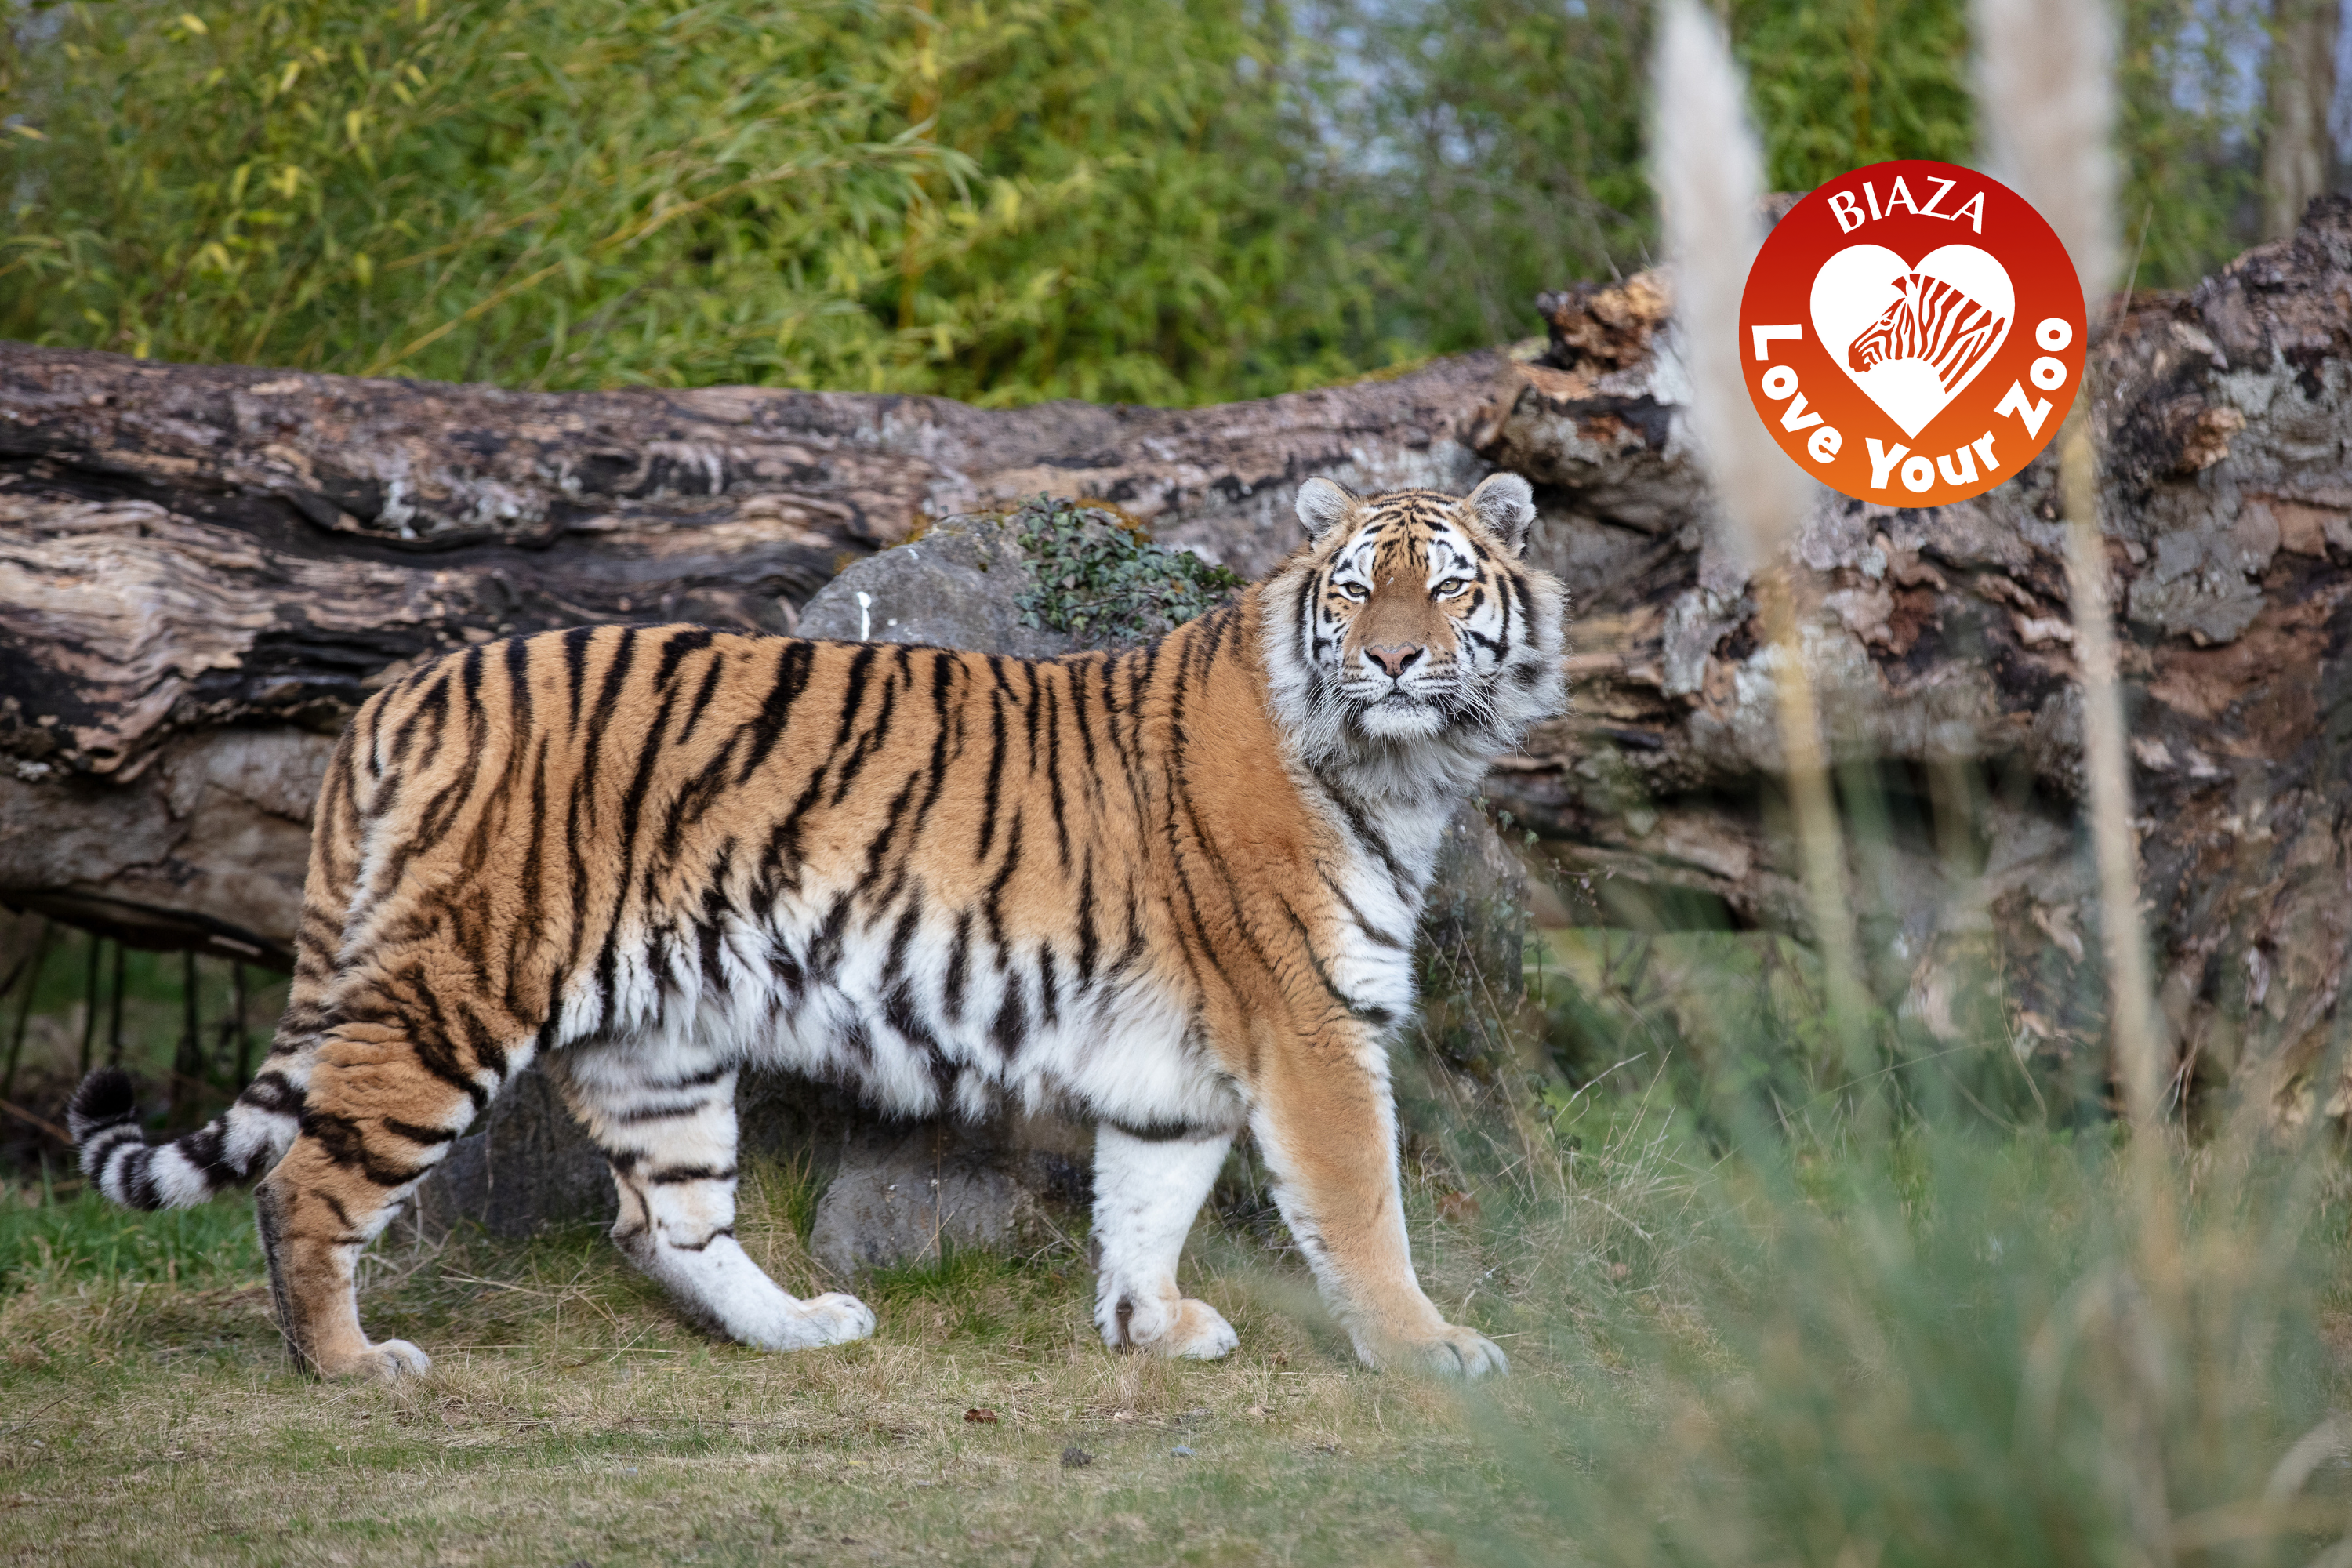 An Amur tiger looking directly at the camera. The image is overlayed with a logo for Love Your Zoo Week 2023.